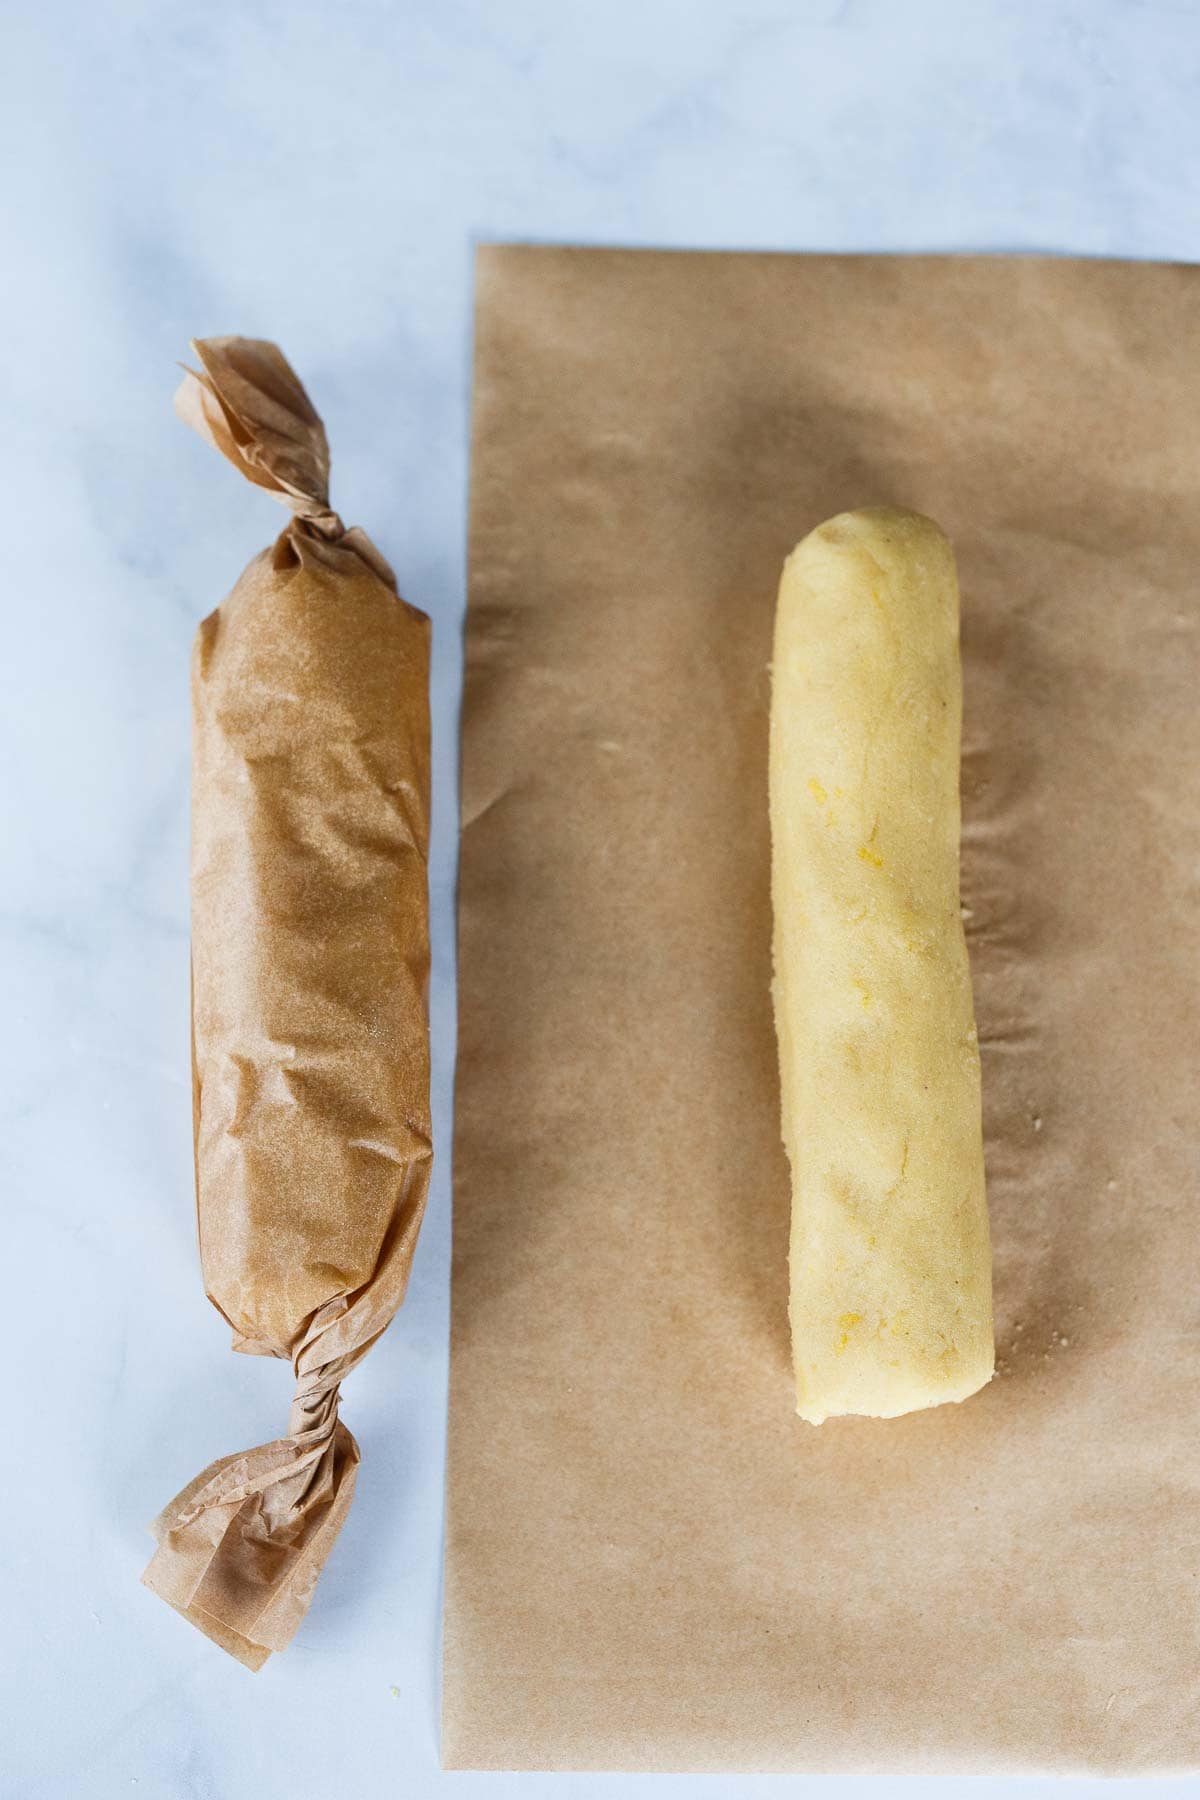 lemon cookie batter rolled into log shape, wrapped up in parchment paper next to roll of lemon cookie batter on top of parchment paper.